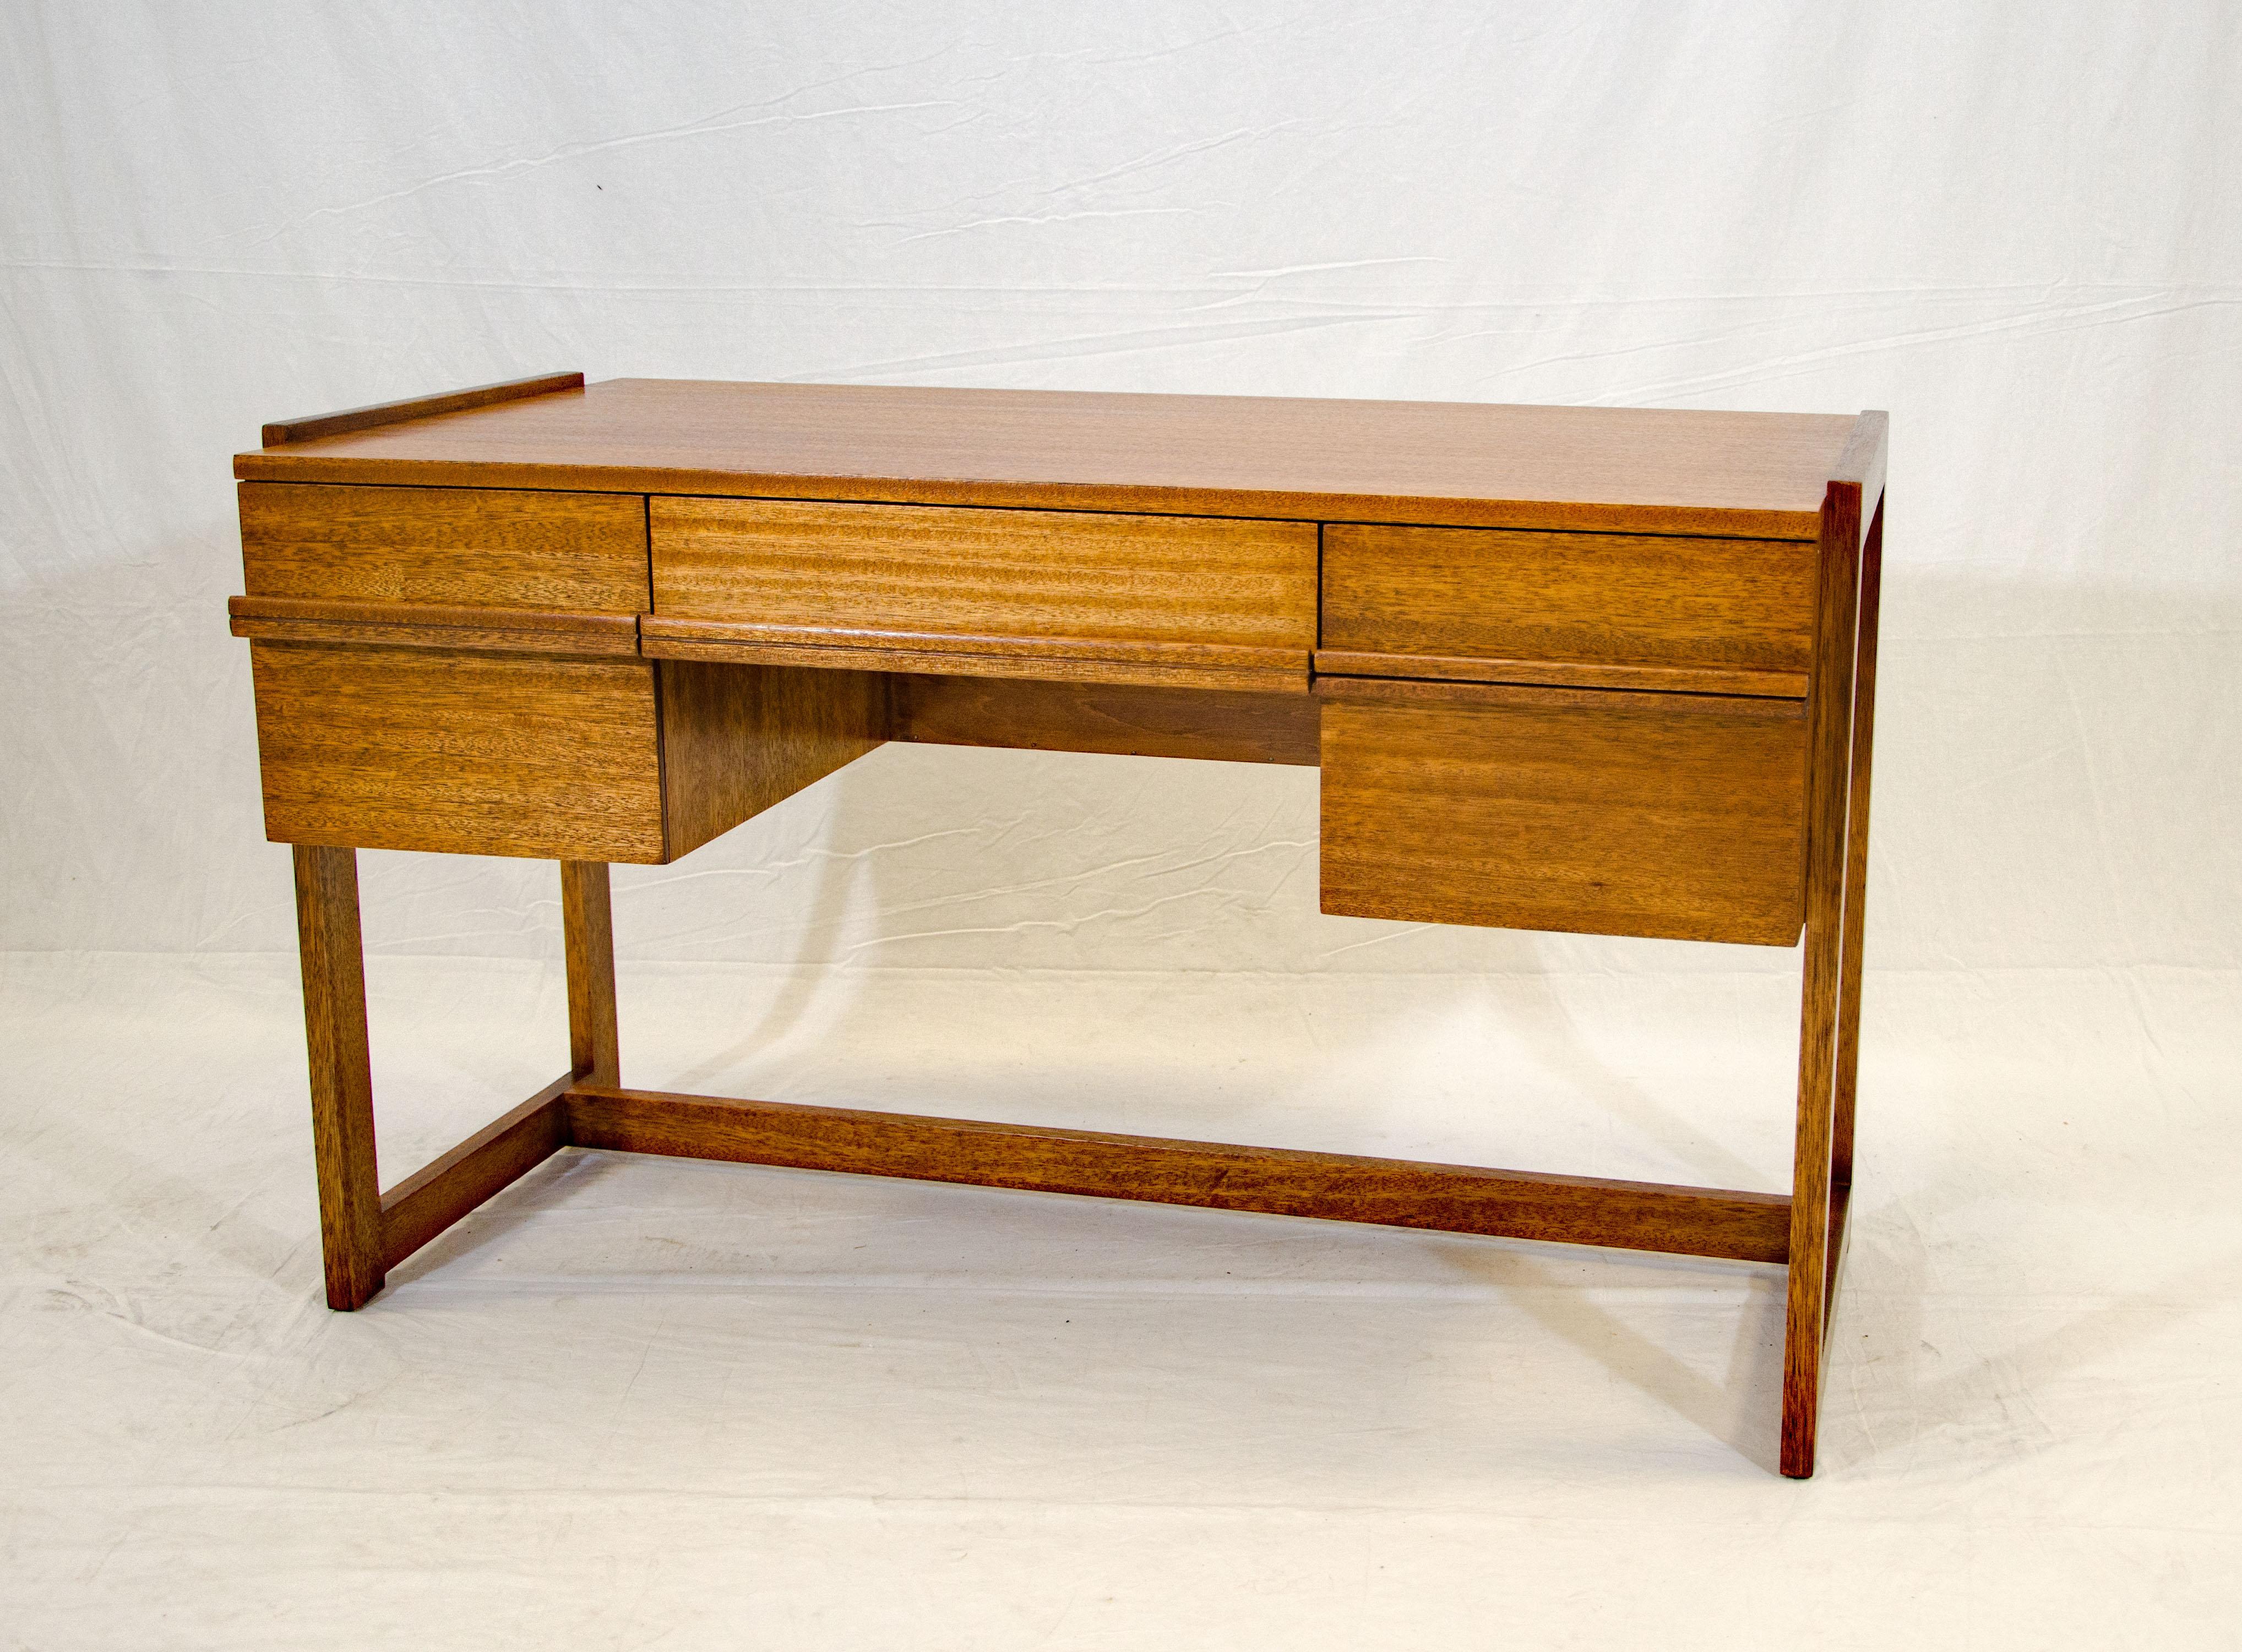 Unusual midcentury desk designed by Paul Laszlo for Brown Saltman. It is finished on all sides so a great piece for placement away from a wall. The seating side has one deep drawer with an interior measurement of 10 3/4